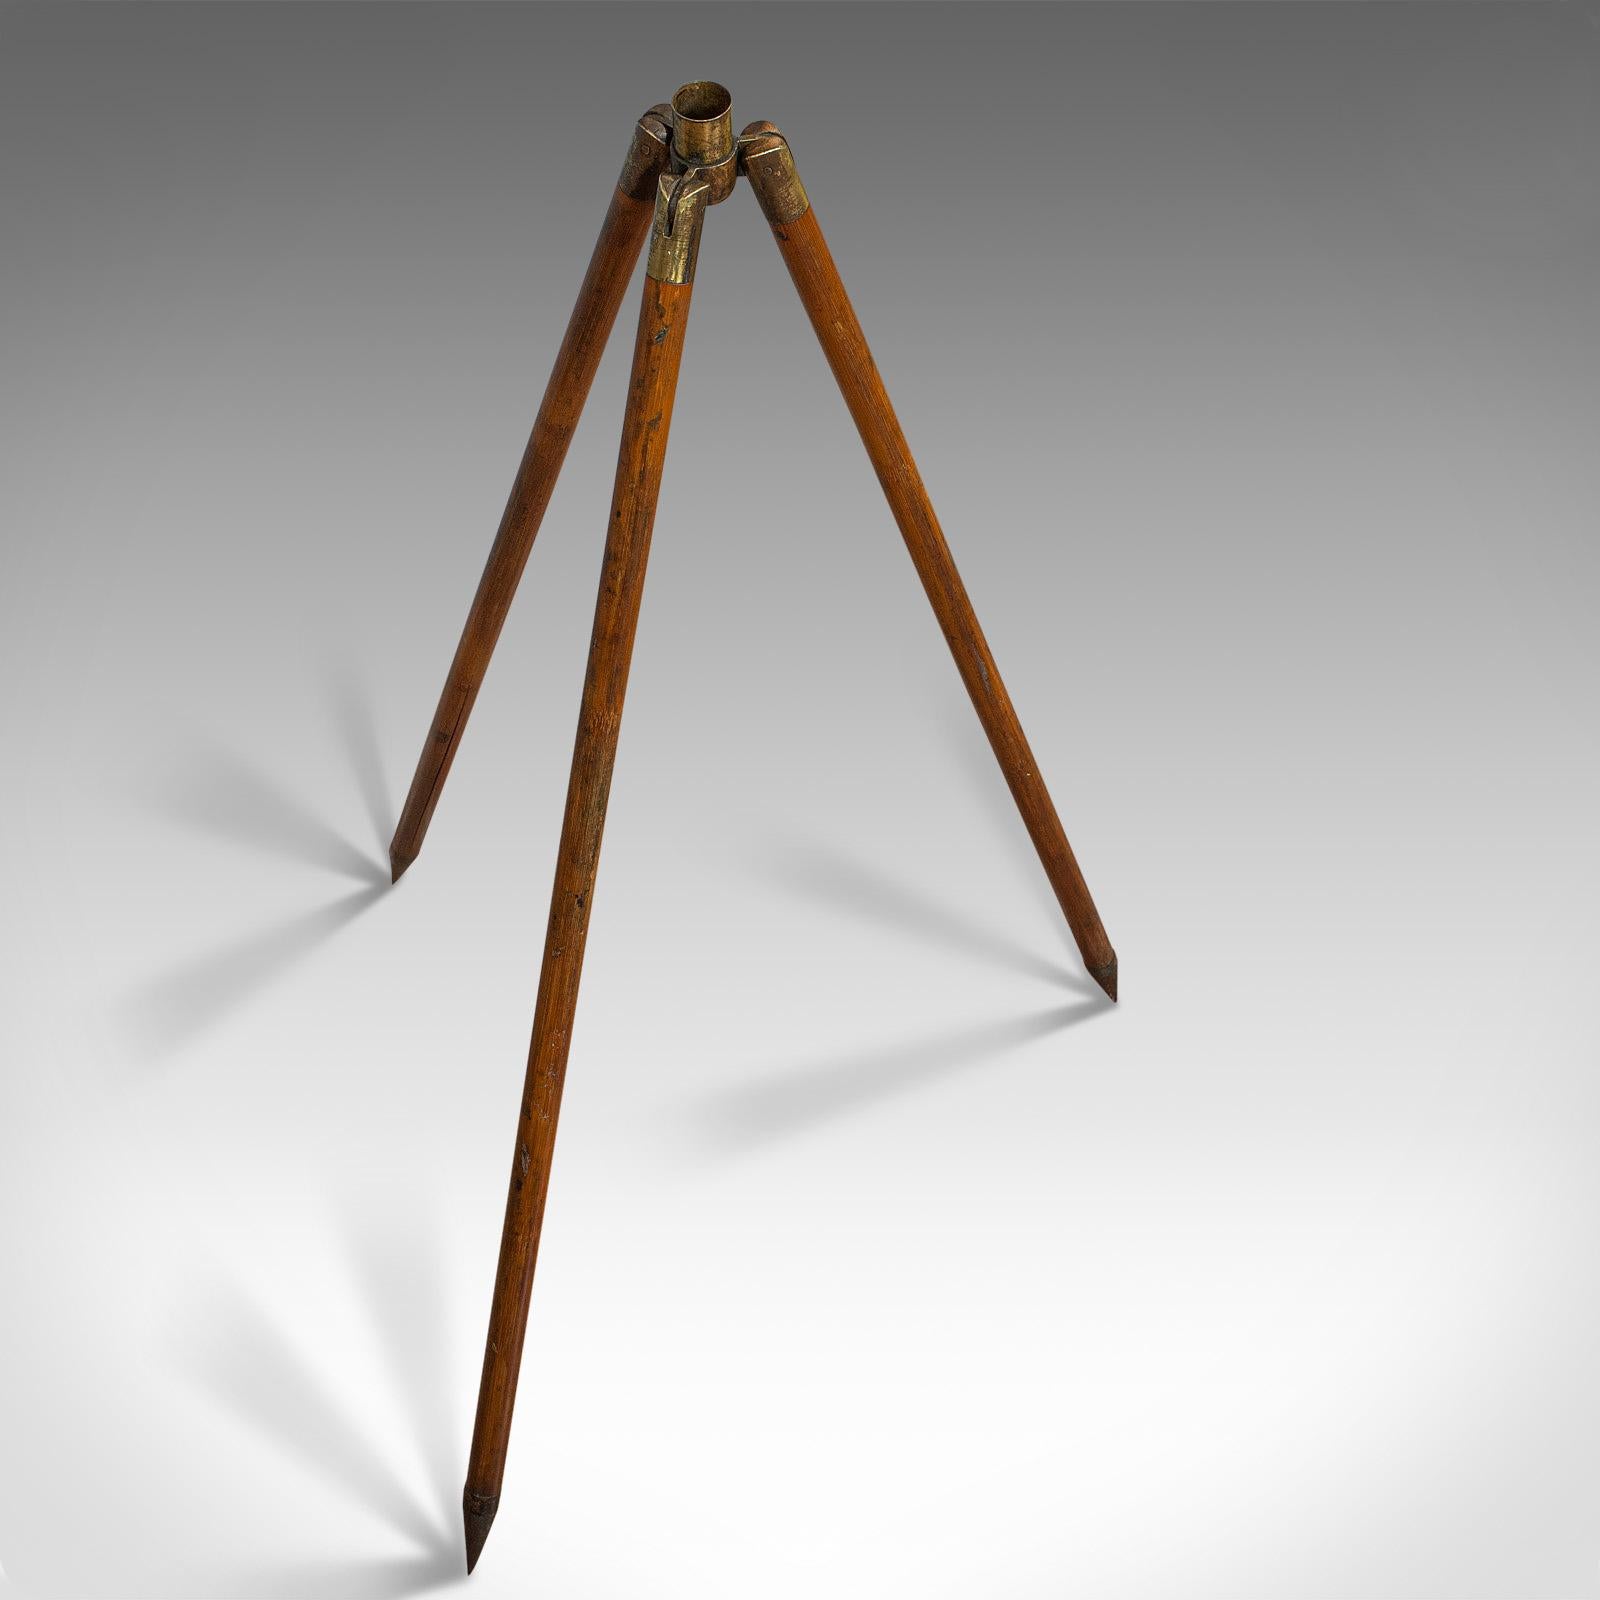 Compact Vintage Tripod, English, Bamboo, Brass, Telescope Stand, 20th Century 1